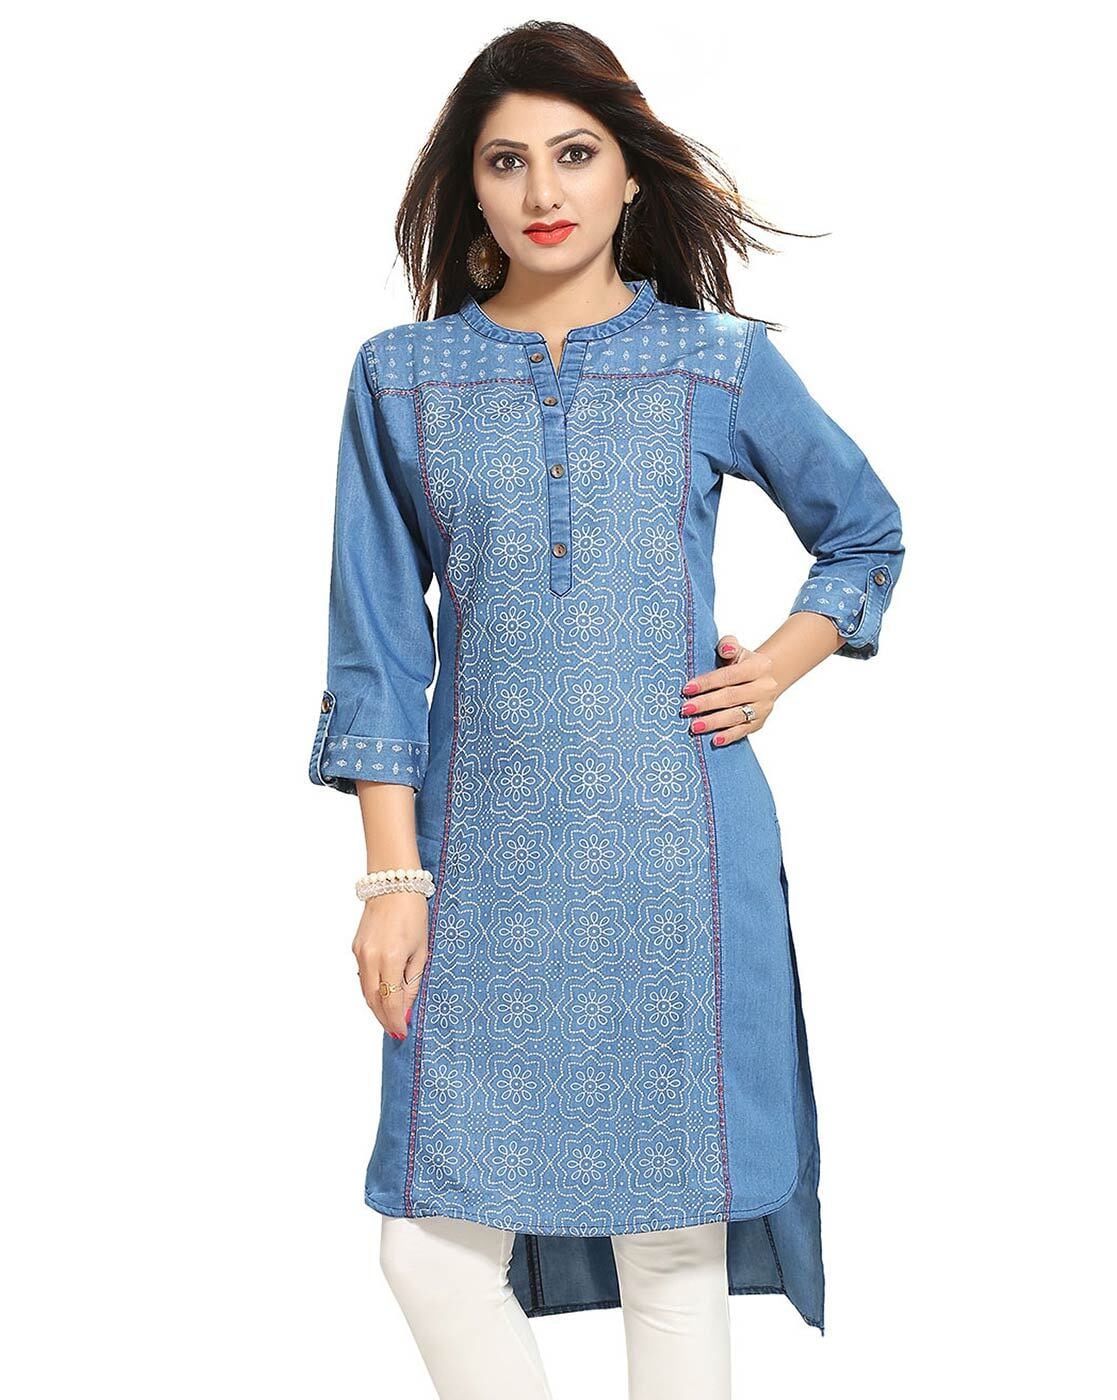 Clemira Presented Denim pure cotton Kurti at Rs.749/8 in surat offer by  Clemira